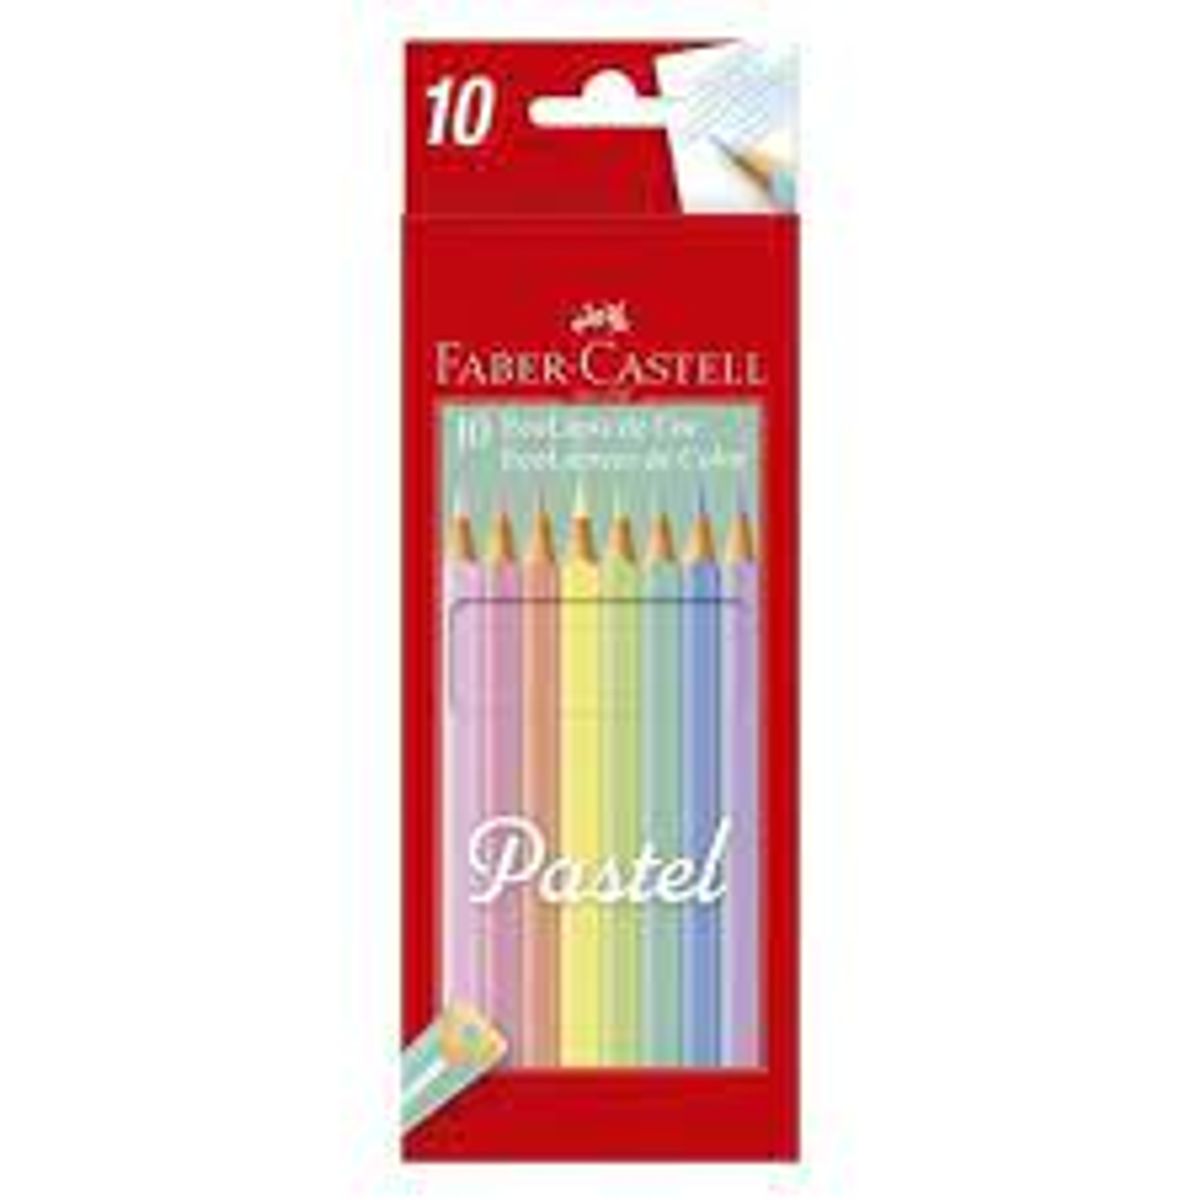 Ecolapis Faber Castell 10 Cores Pastel image number 0